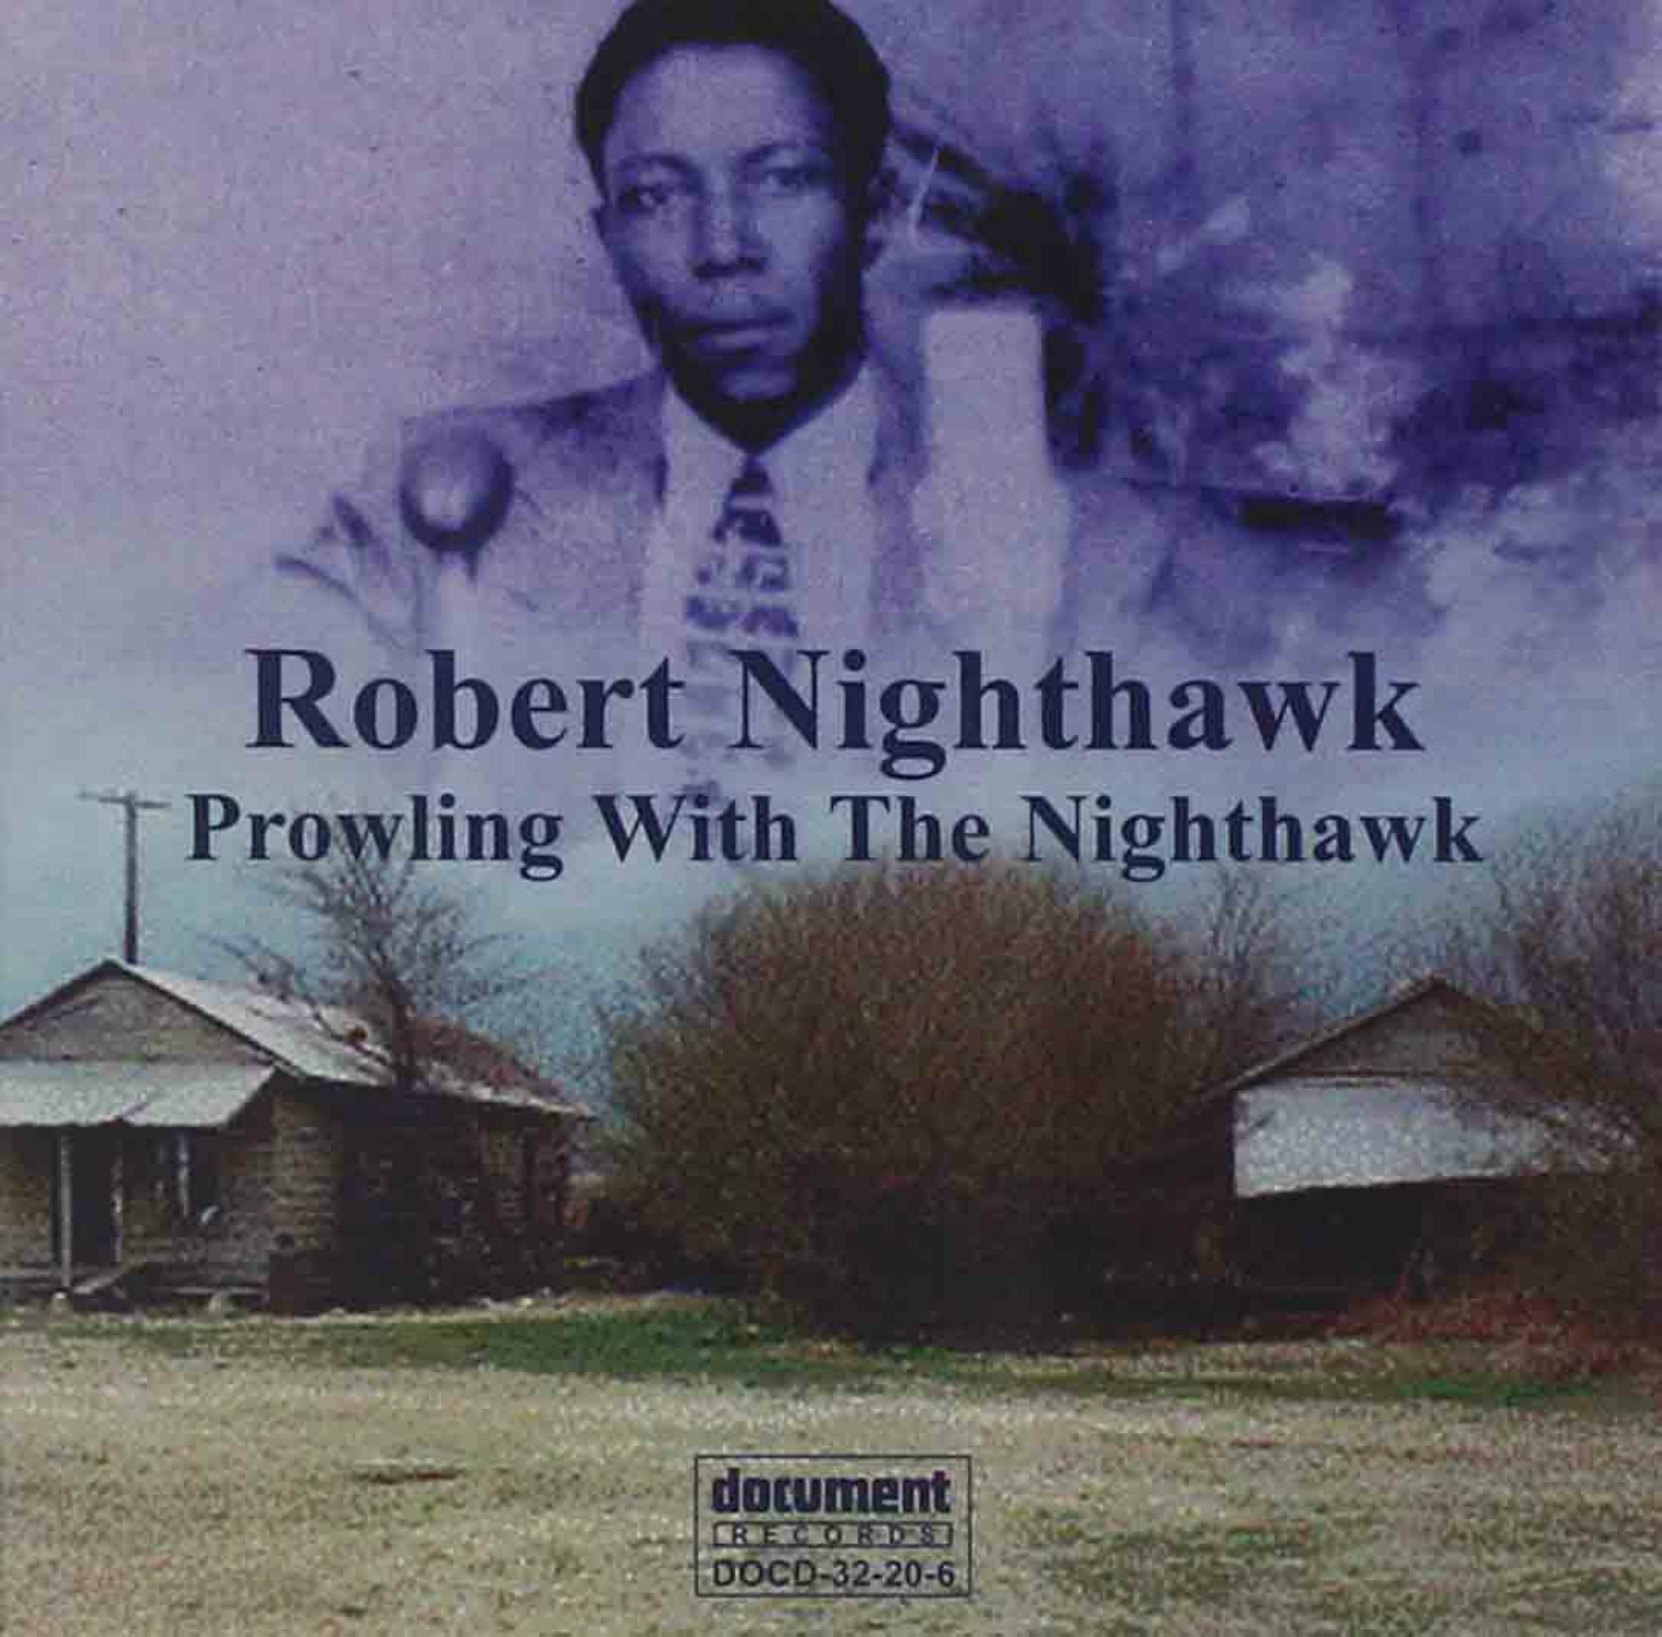 CD cover, Prowlin' With The Nighthawk by Robert Nighthawk, on Document Records.